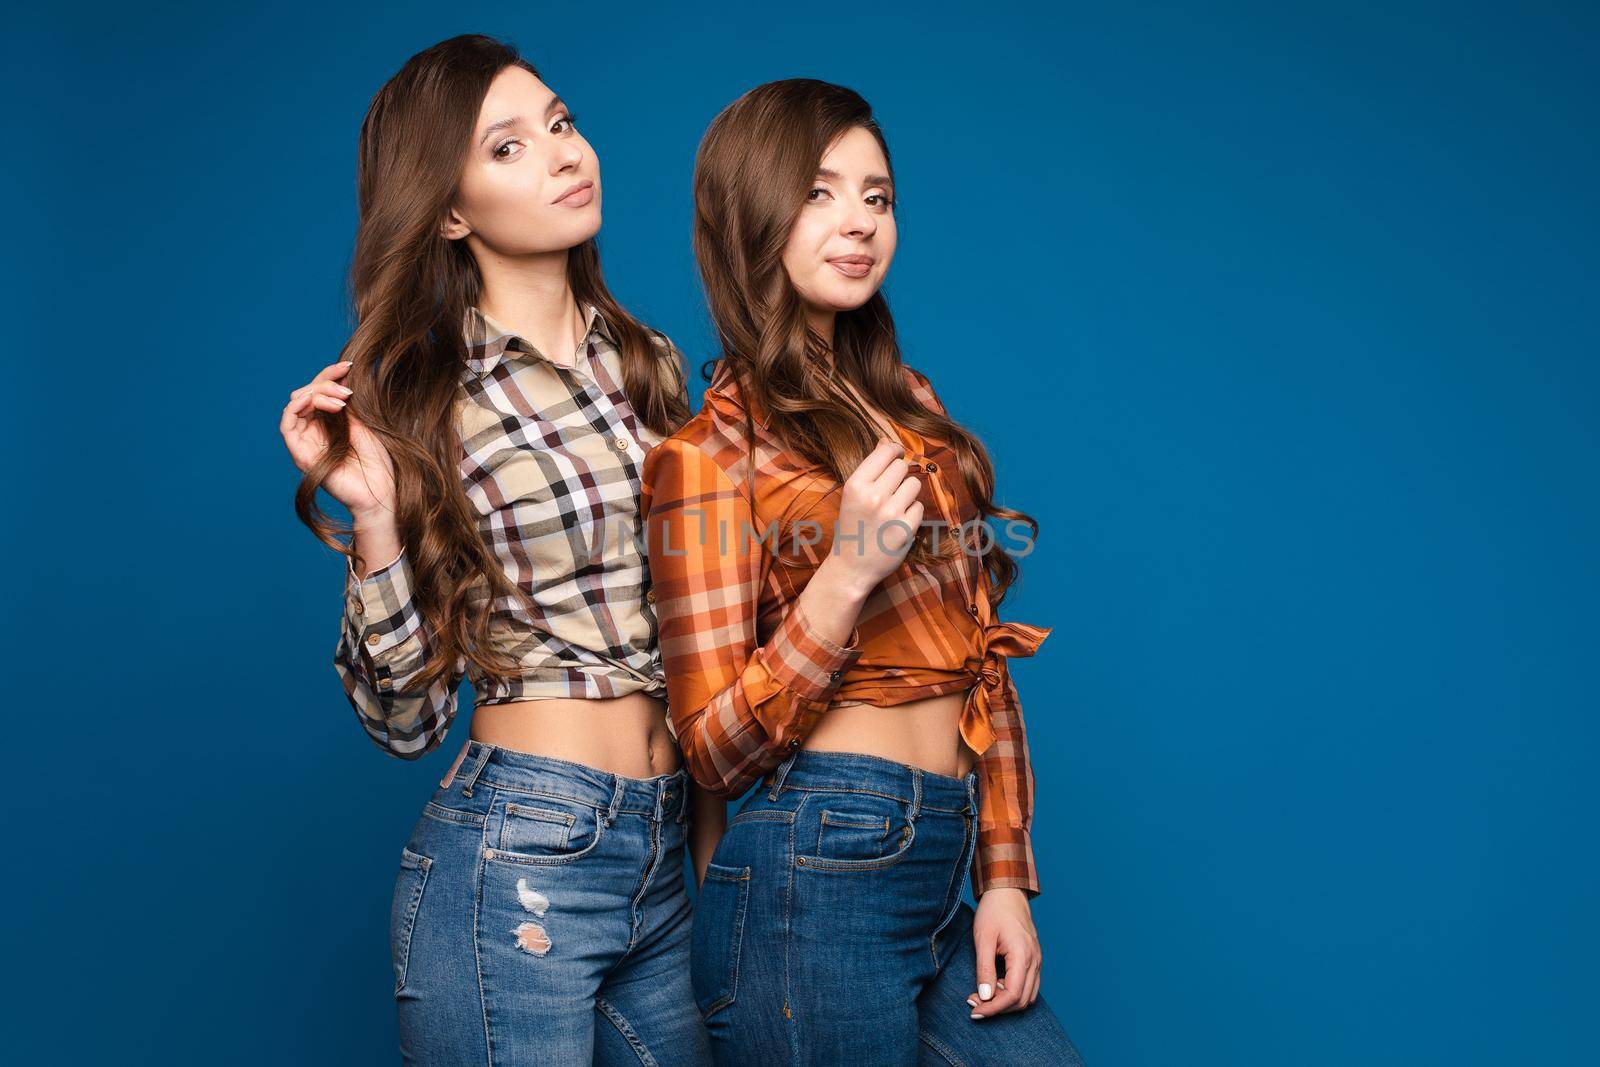 Two pretty slim sisters wearing checkered shirts, jeans and sneakers posing together on blue isolated background. Female sporty teens looking at camera and smiling. Concept of trends and style.